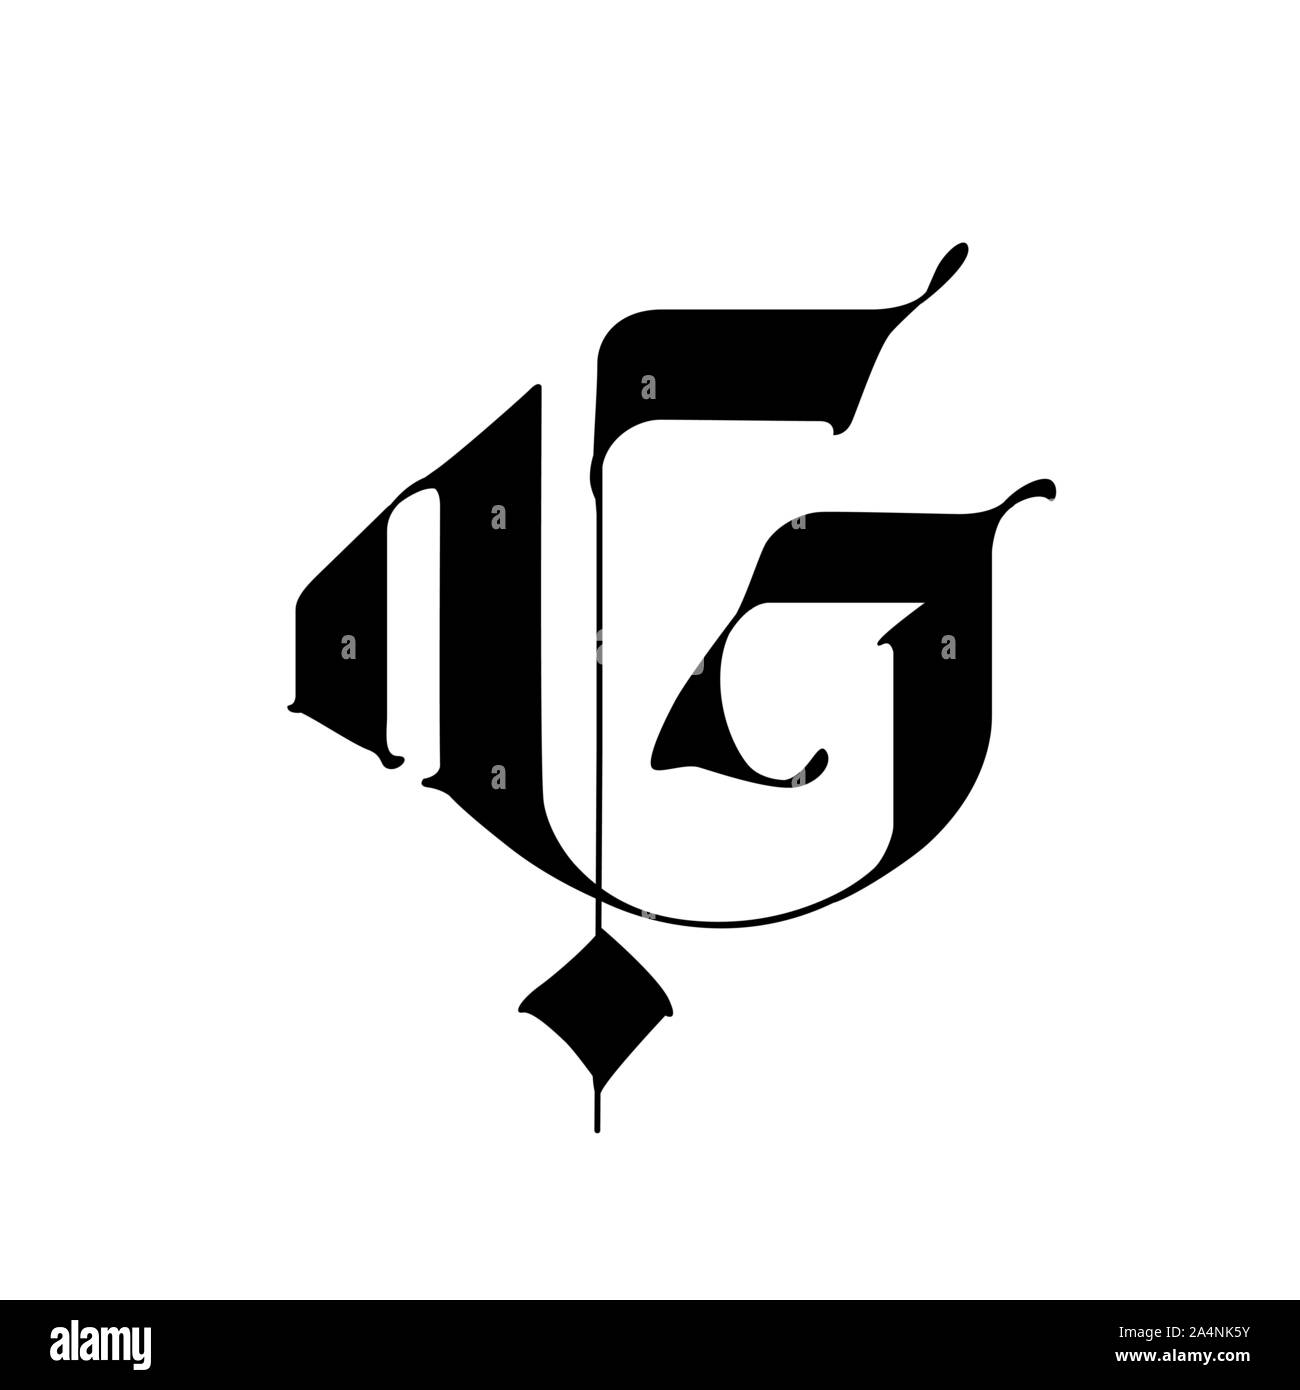 Very Simple and Beautiful G Letter Tattoo Designs❤️ Four different types of  G letter tattoos #tattoo - YouTube